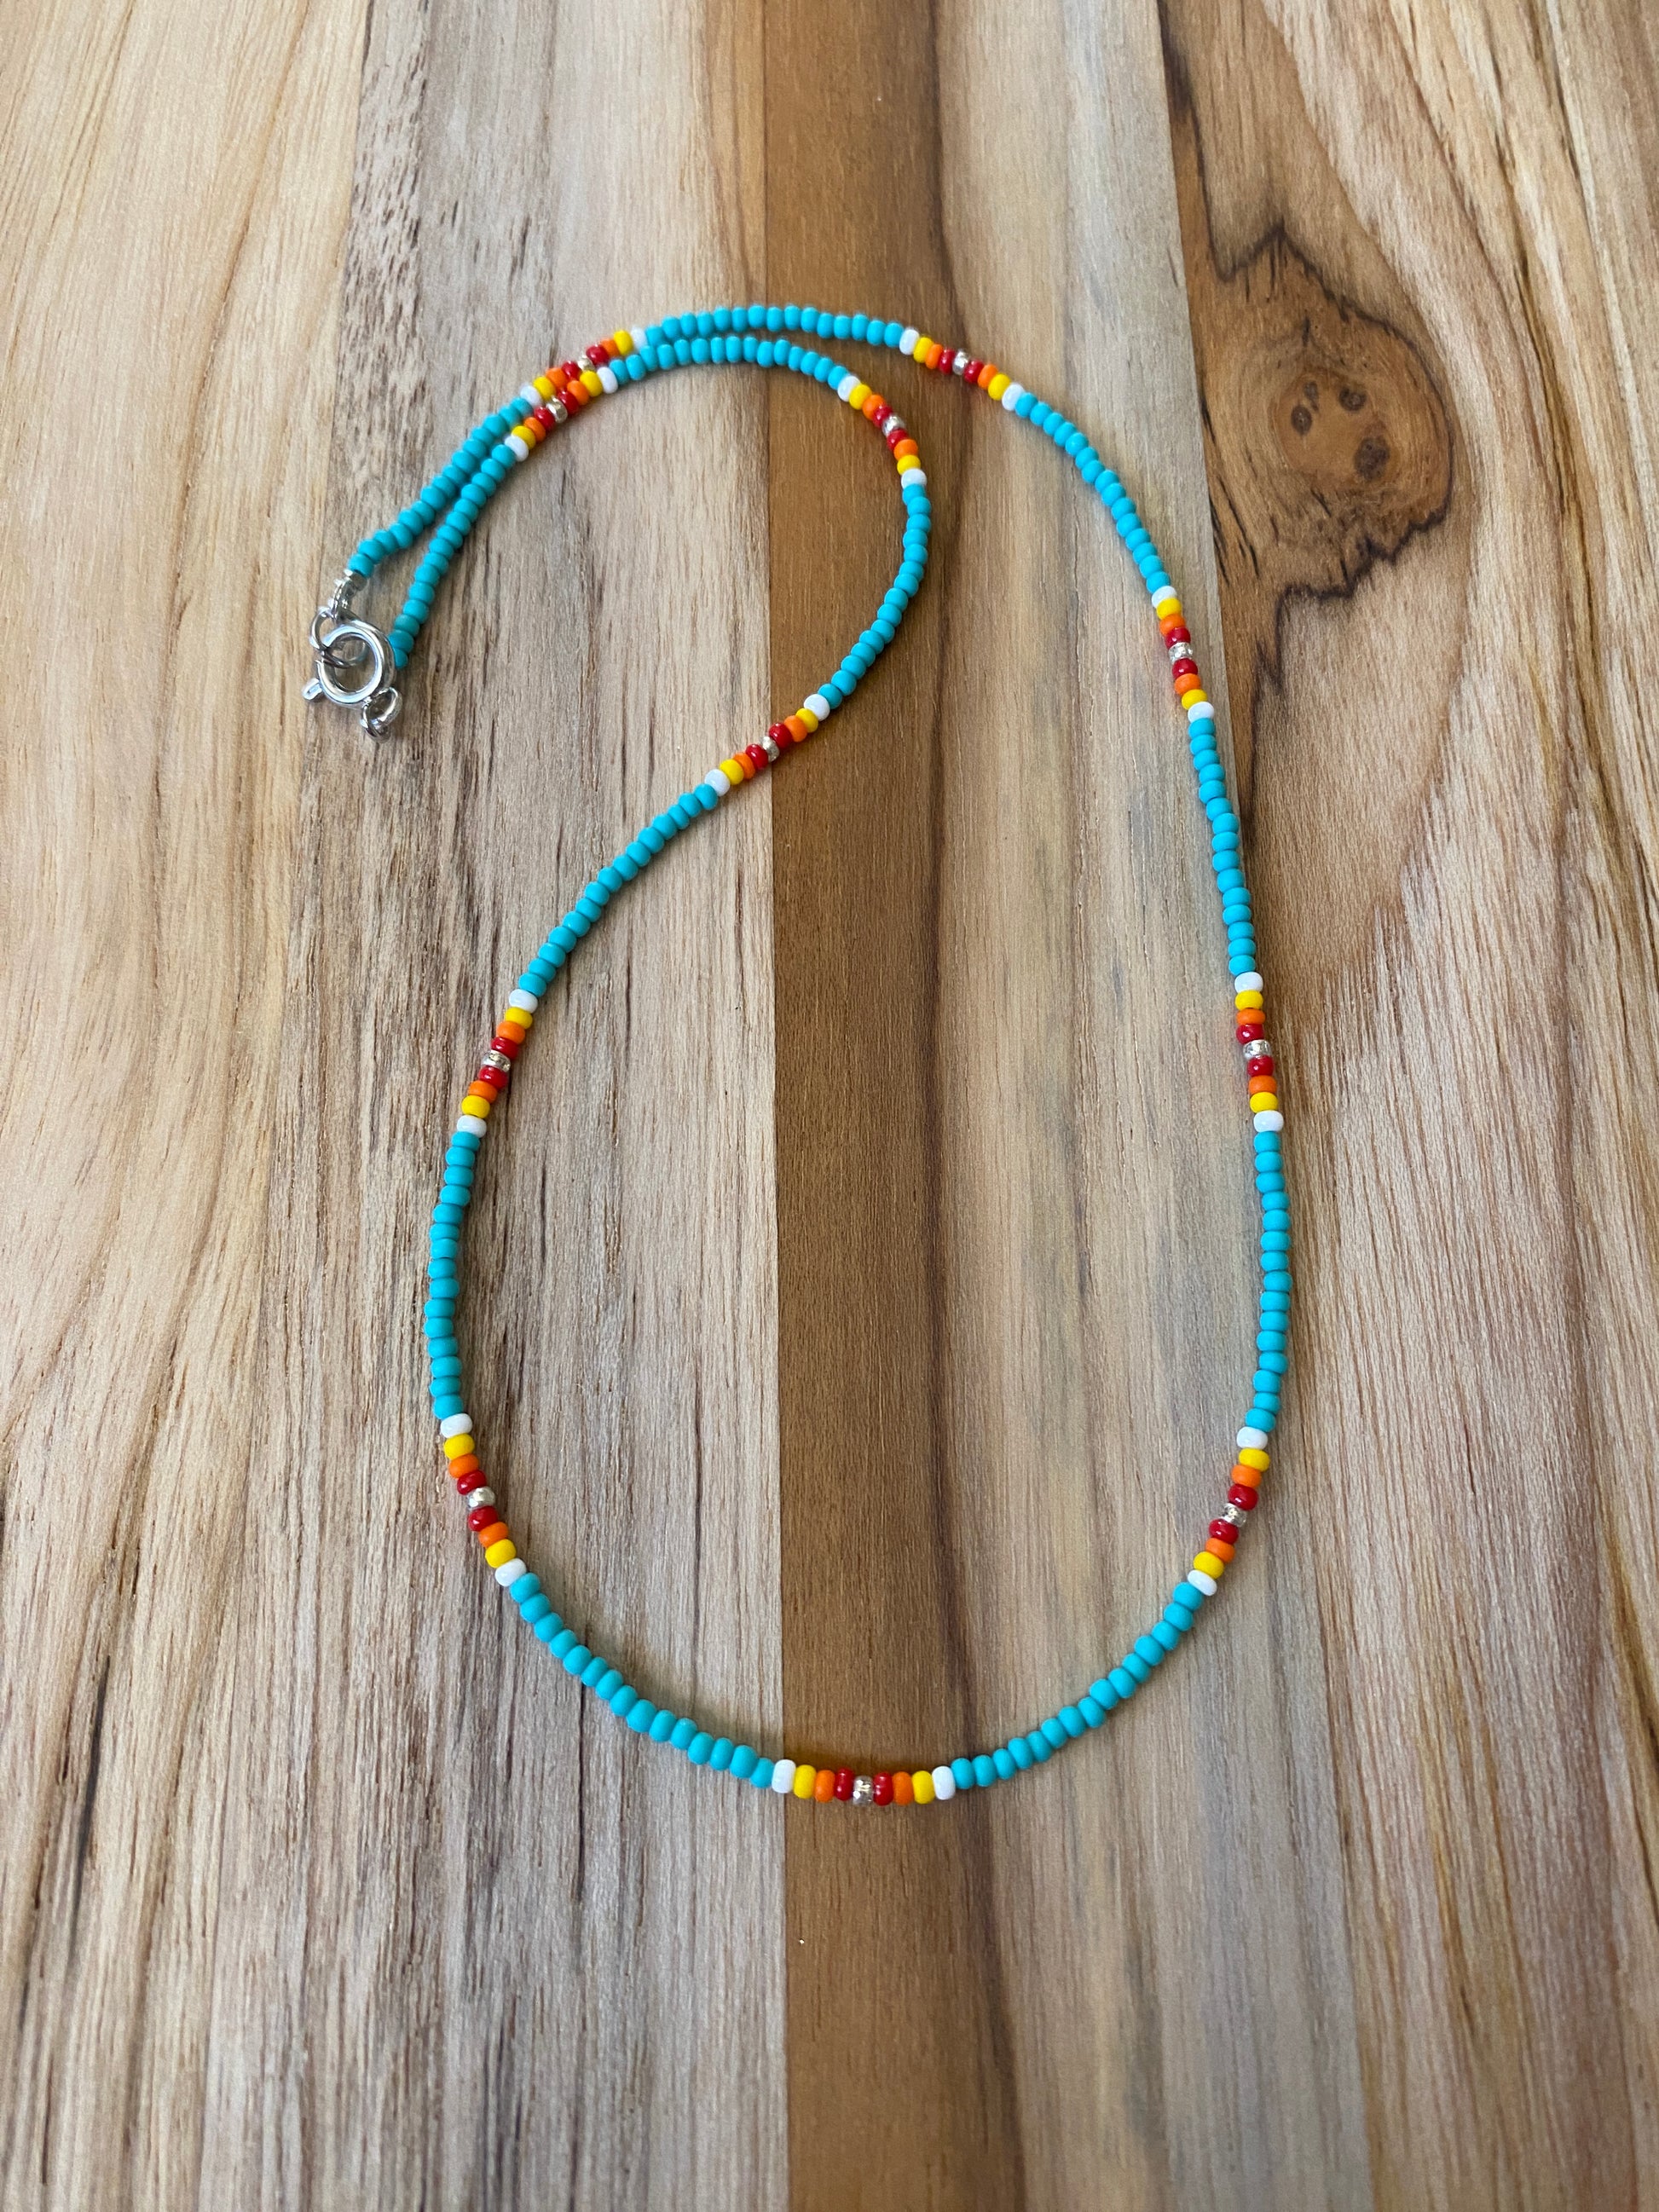 16" Dainty Minimalist Native Inspired Seed Bead Necklace Multi ColoredTurquoise - My Urban Gems